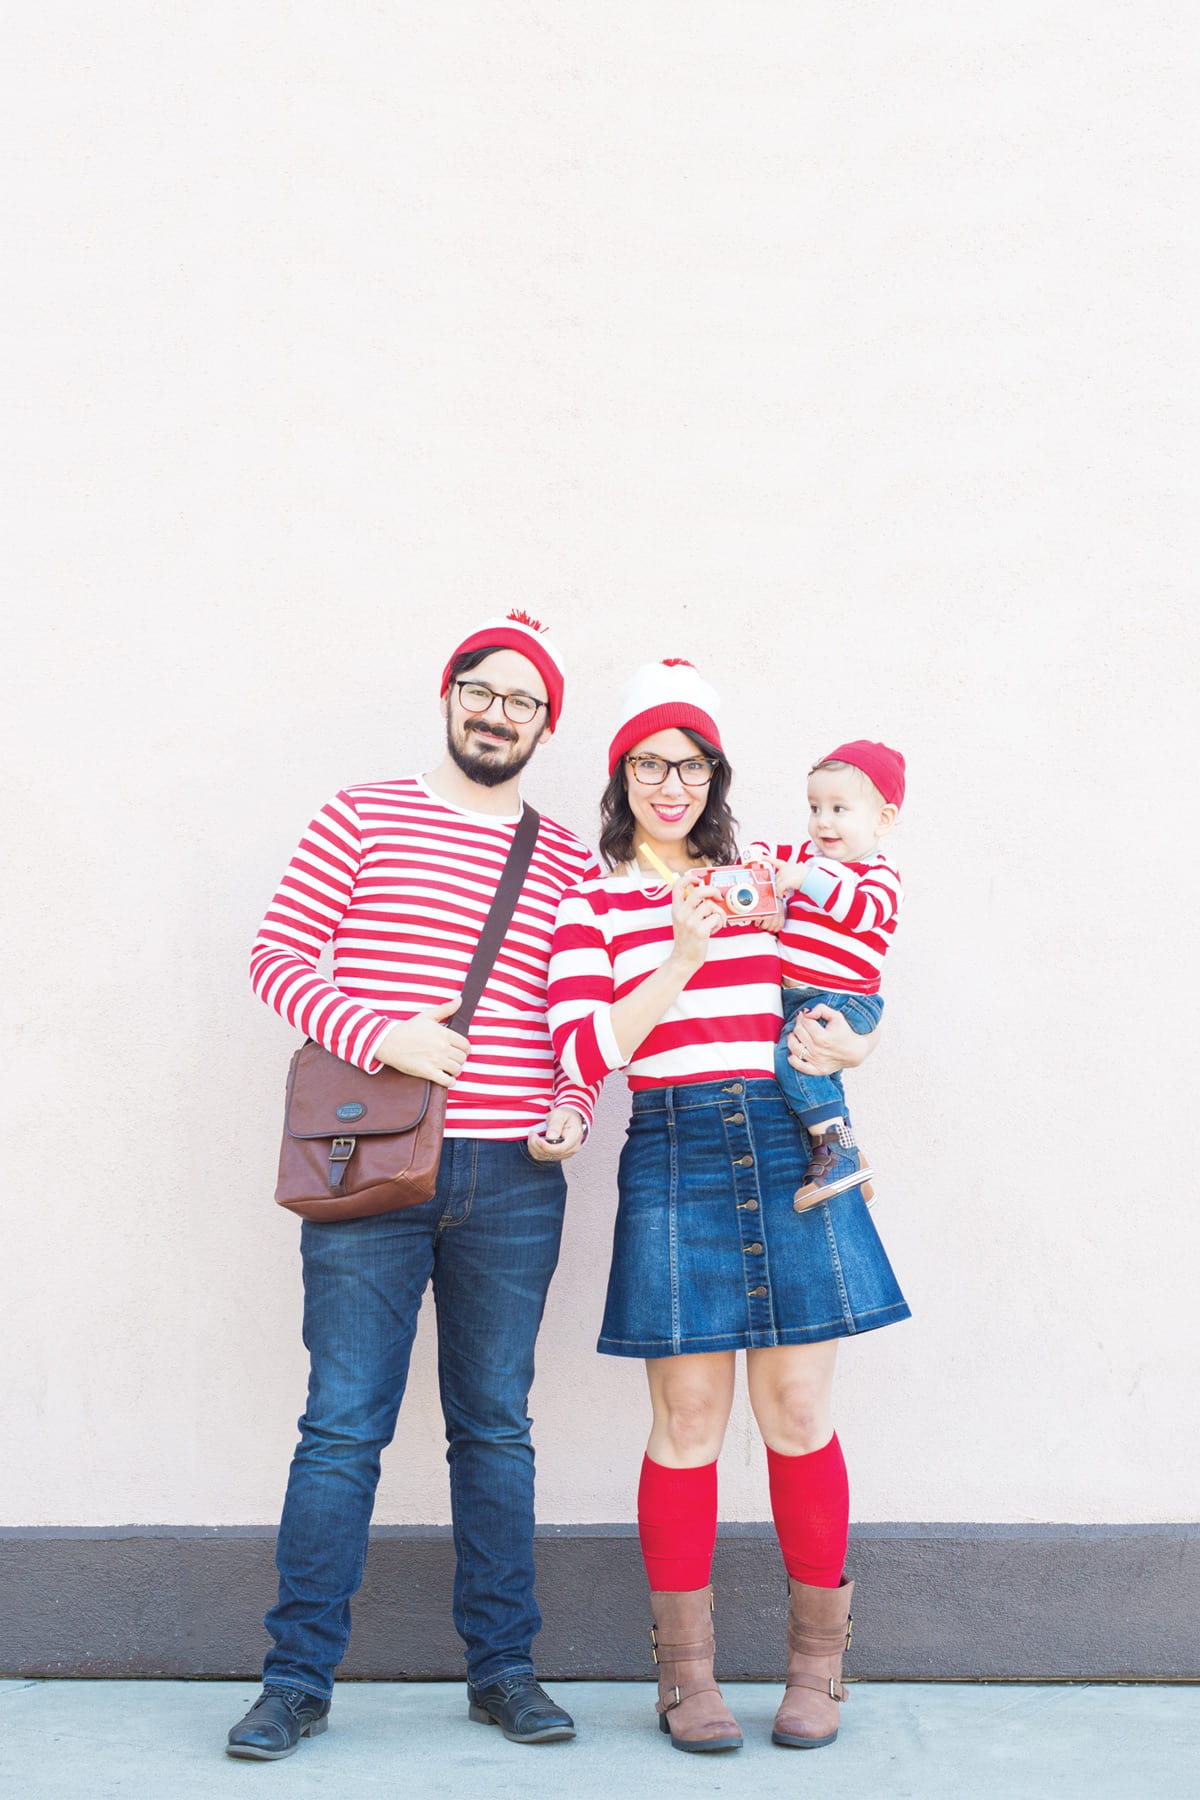 A family of three - mom, dad, and baby - dressed as Where's Waldo in red and white striped shirts, jeans, and red and white hats.